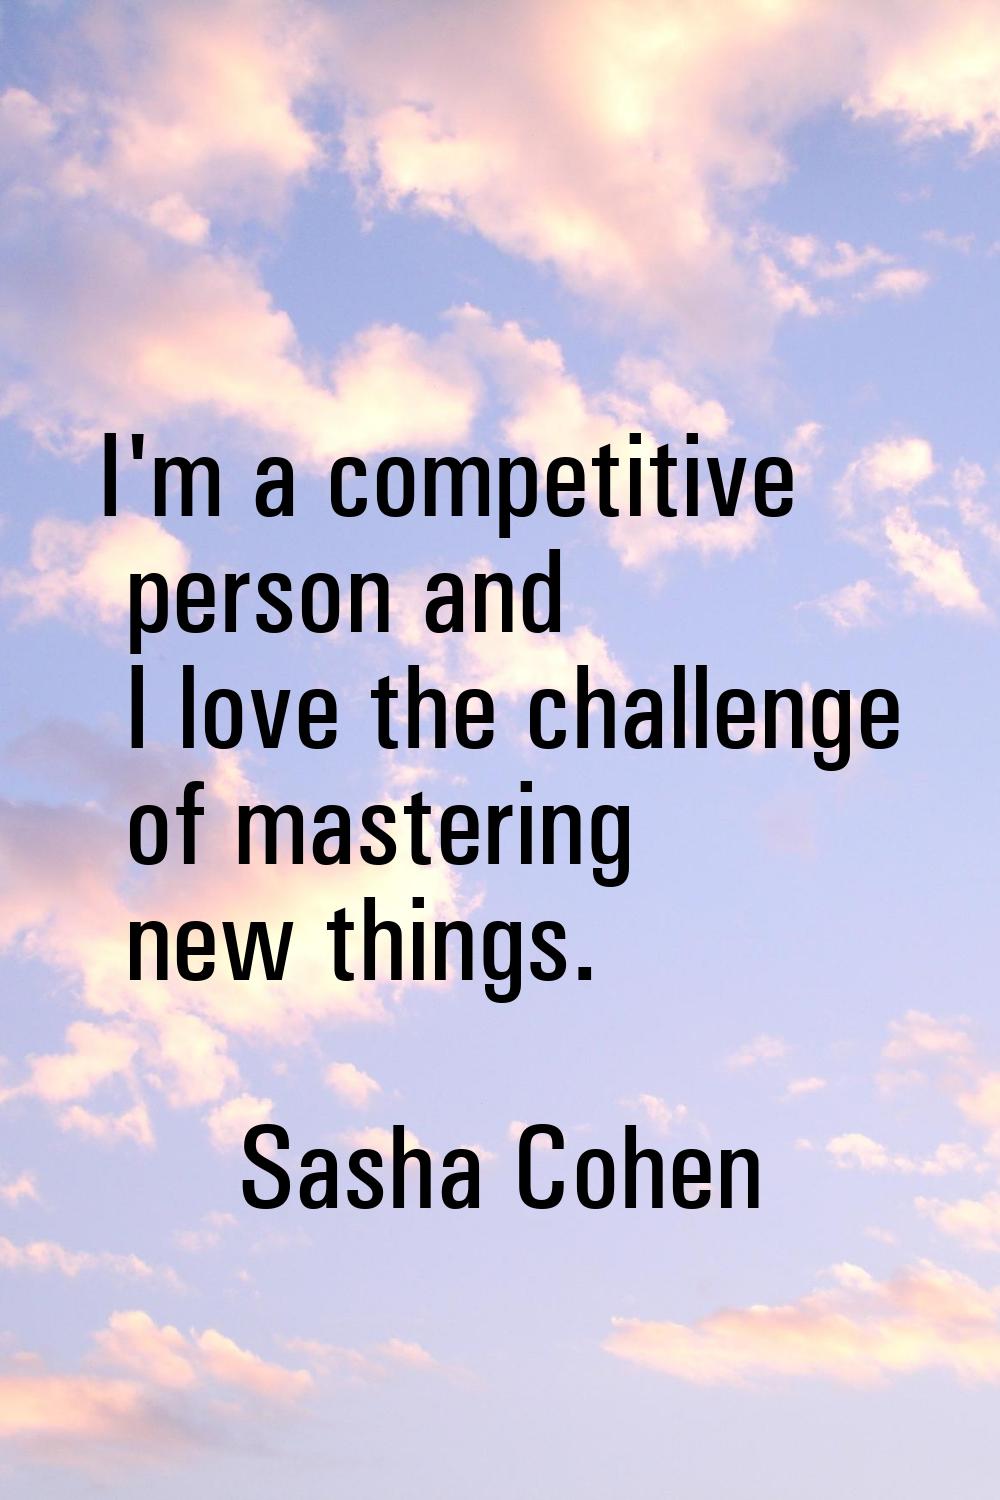 I'm a competitive person and I love the challenge of mastering new things.